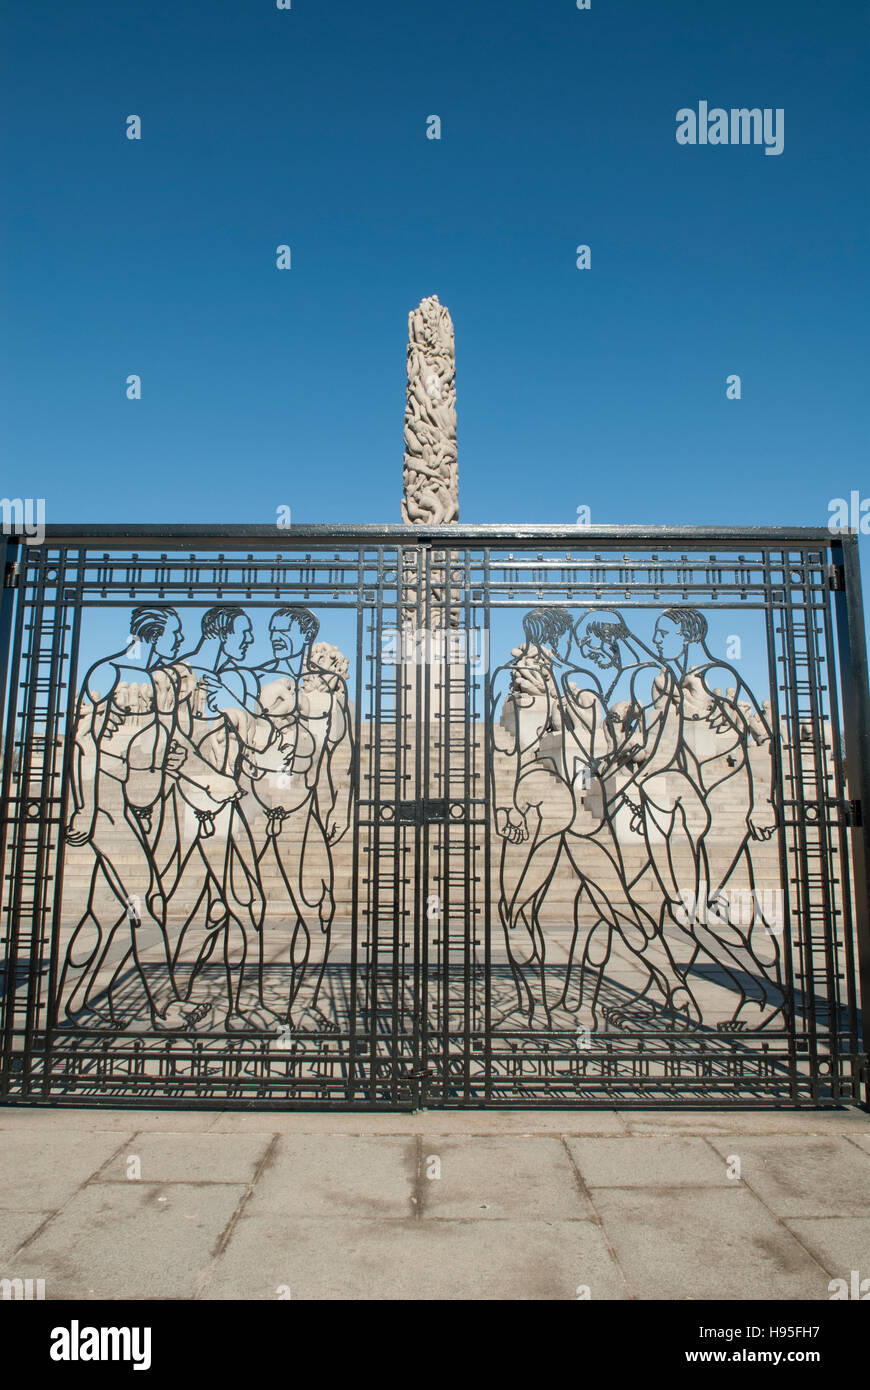 The monolith by the gate of Frogner Park Oslo Norway Europe Stock Photo